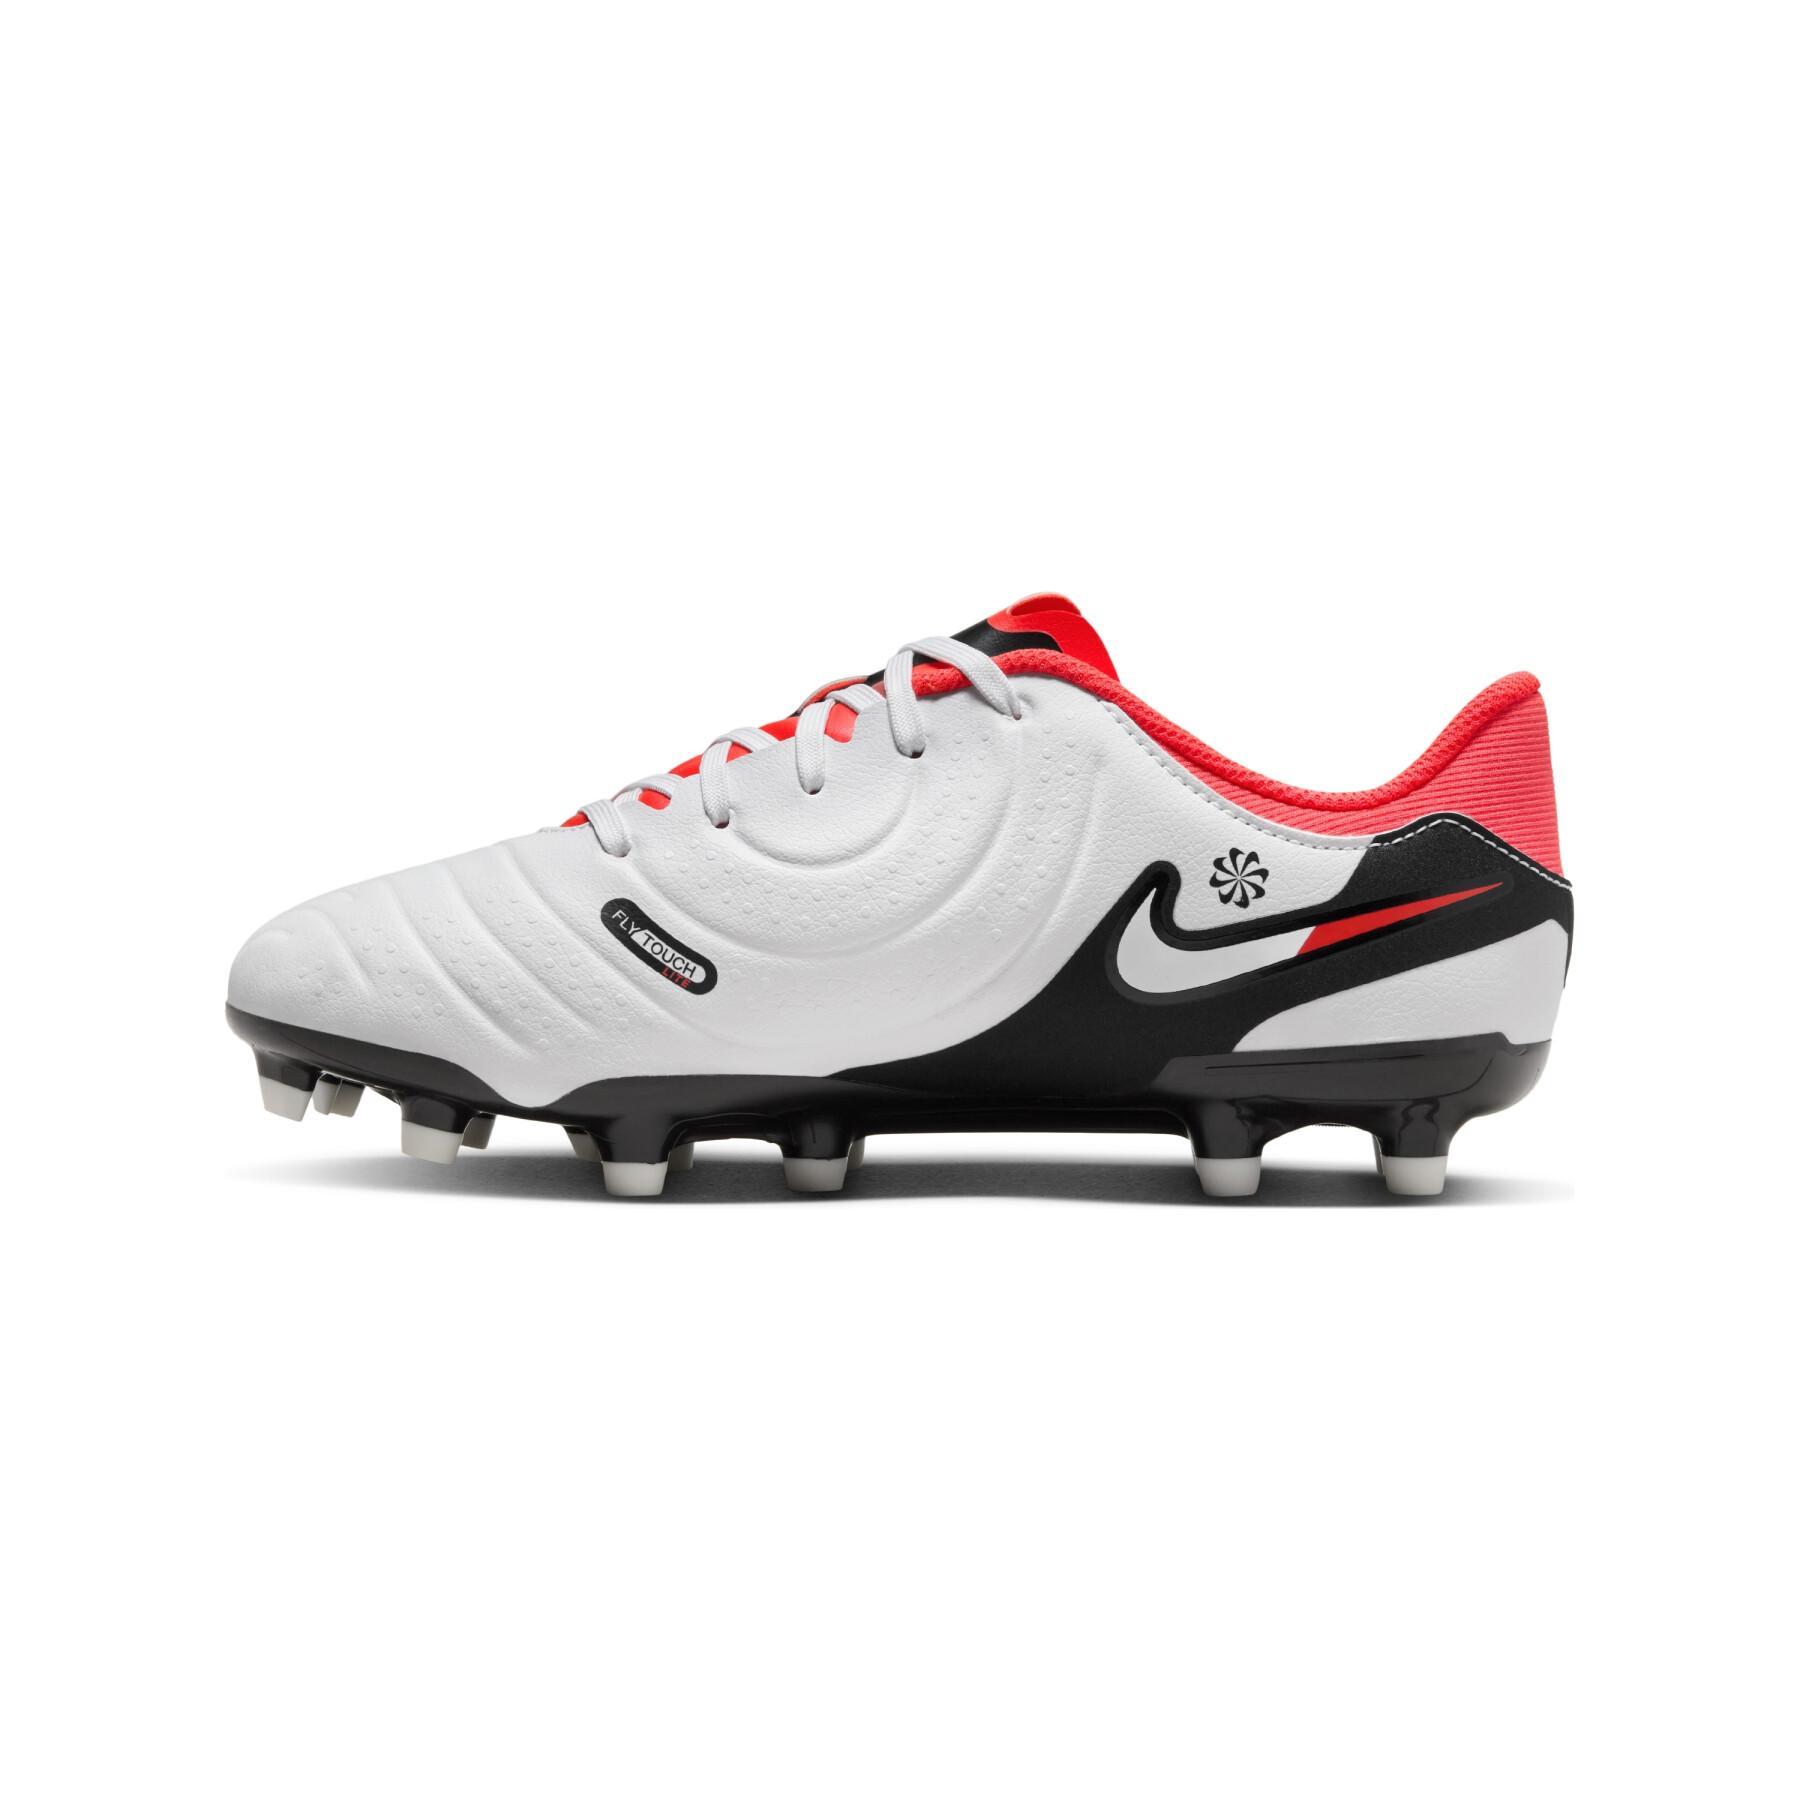 Children's soccer shoes Nike Tiempo Legend 10 Academy MG - Ready Pack